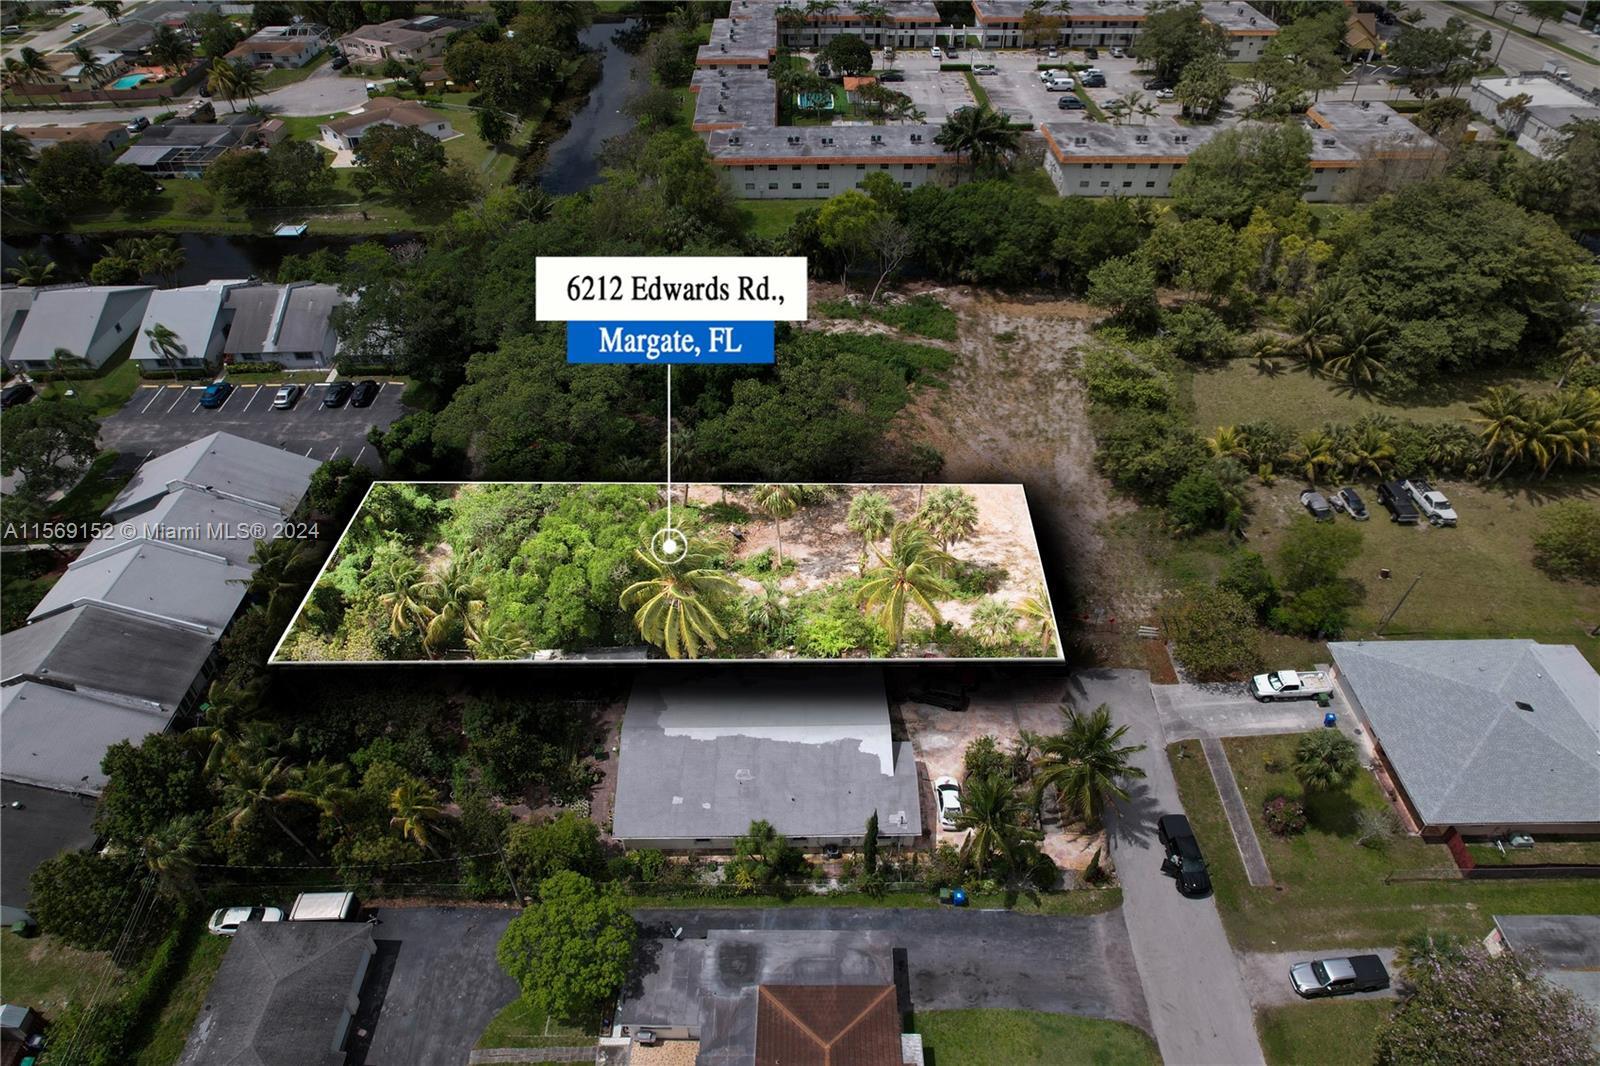 Photo of 6212 Edwards Rd in Margate, FL